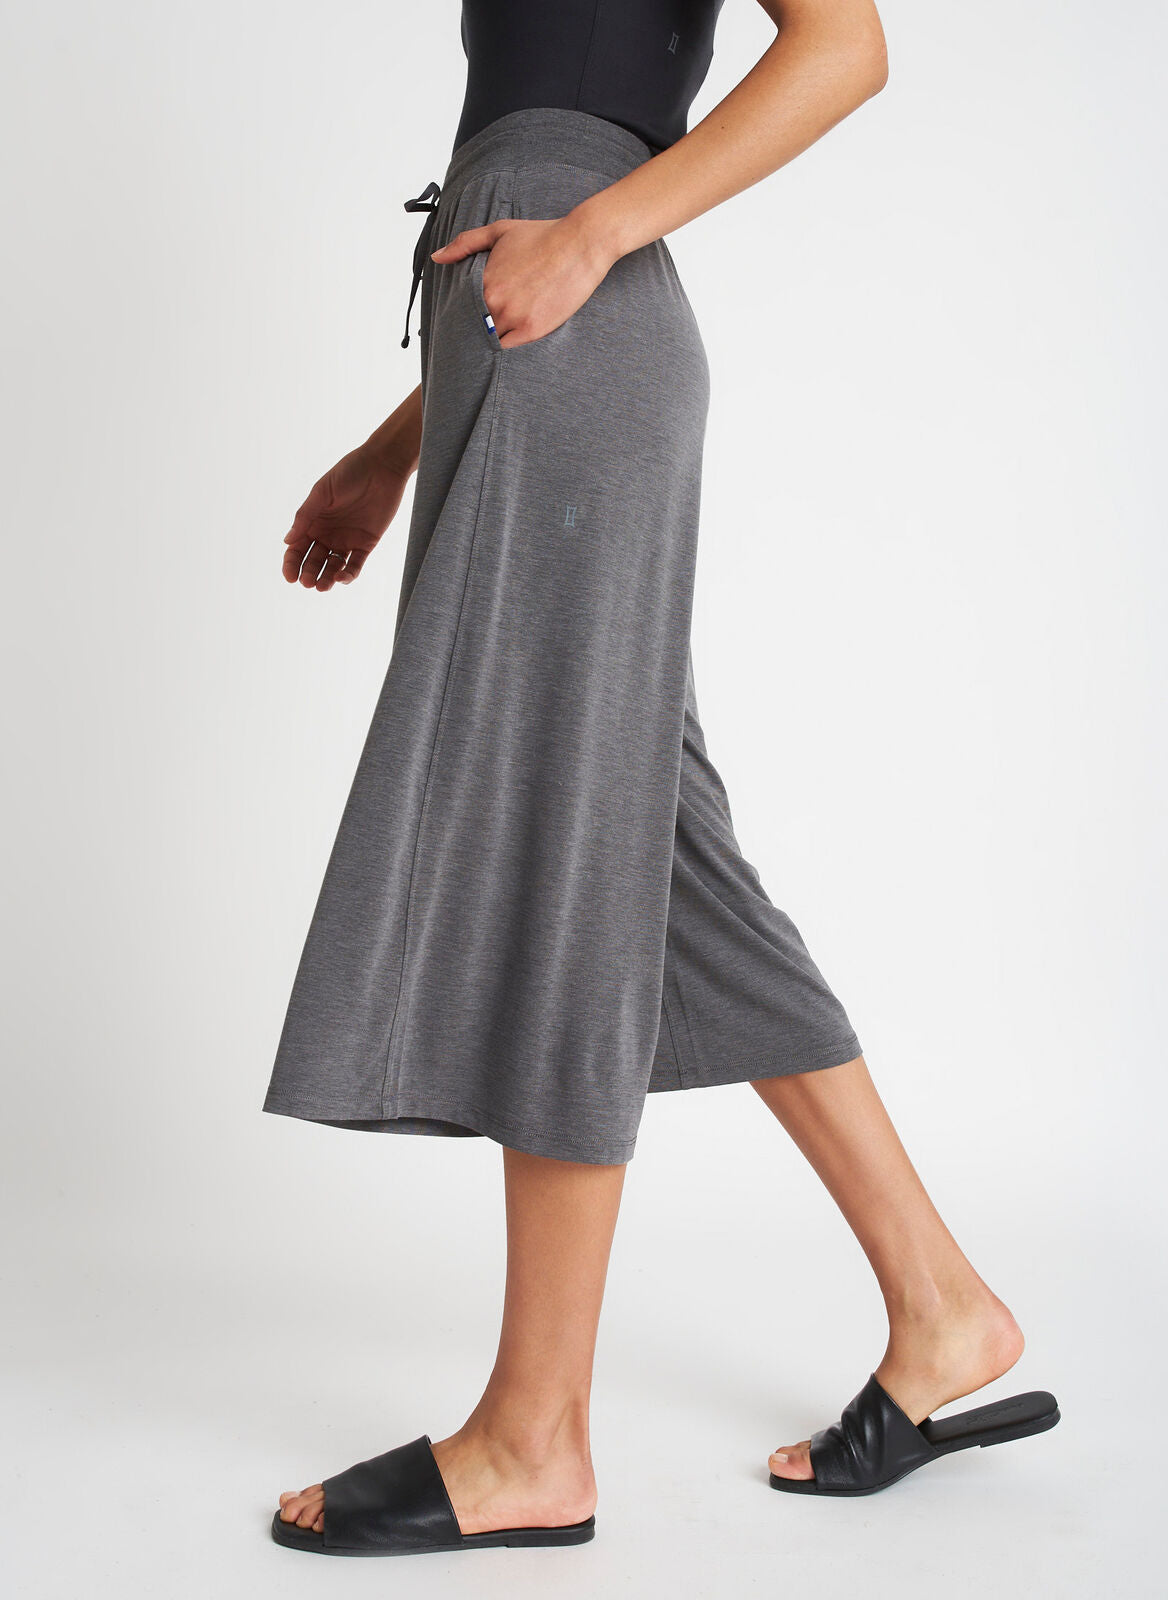 Kit and Ace — At Ease Culottes